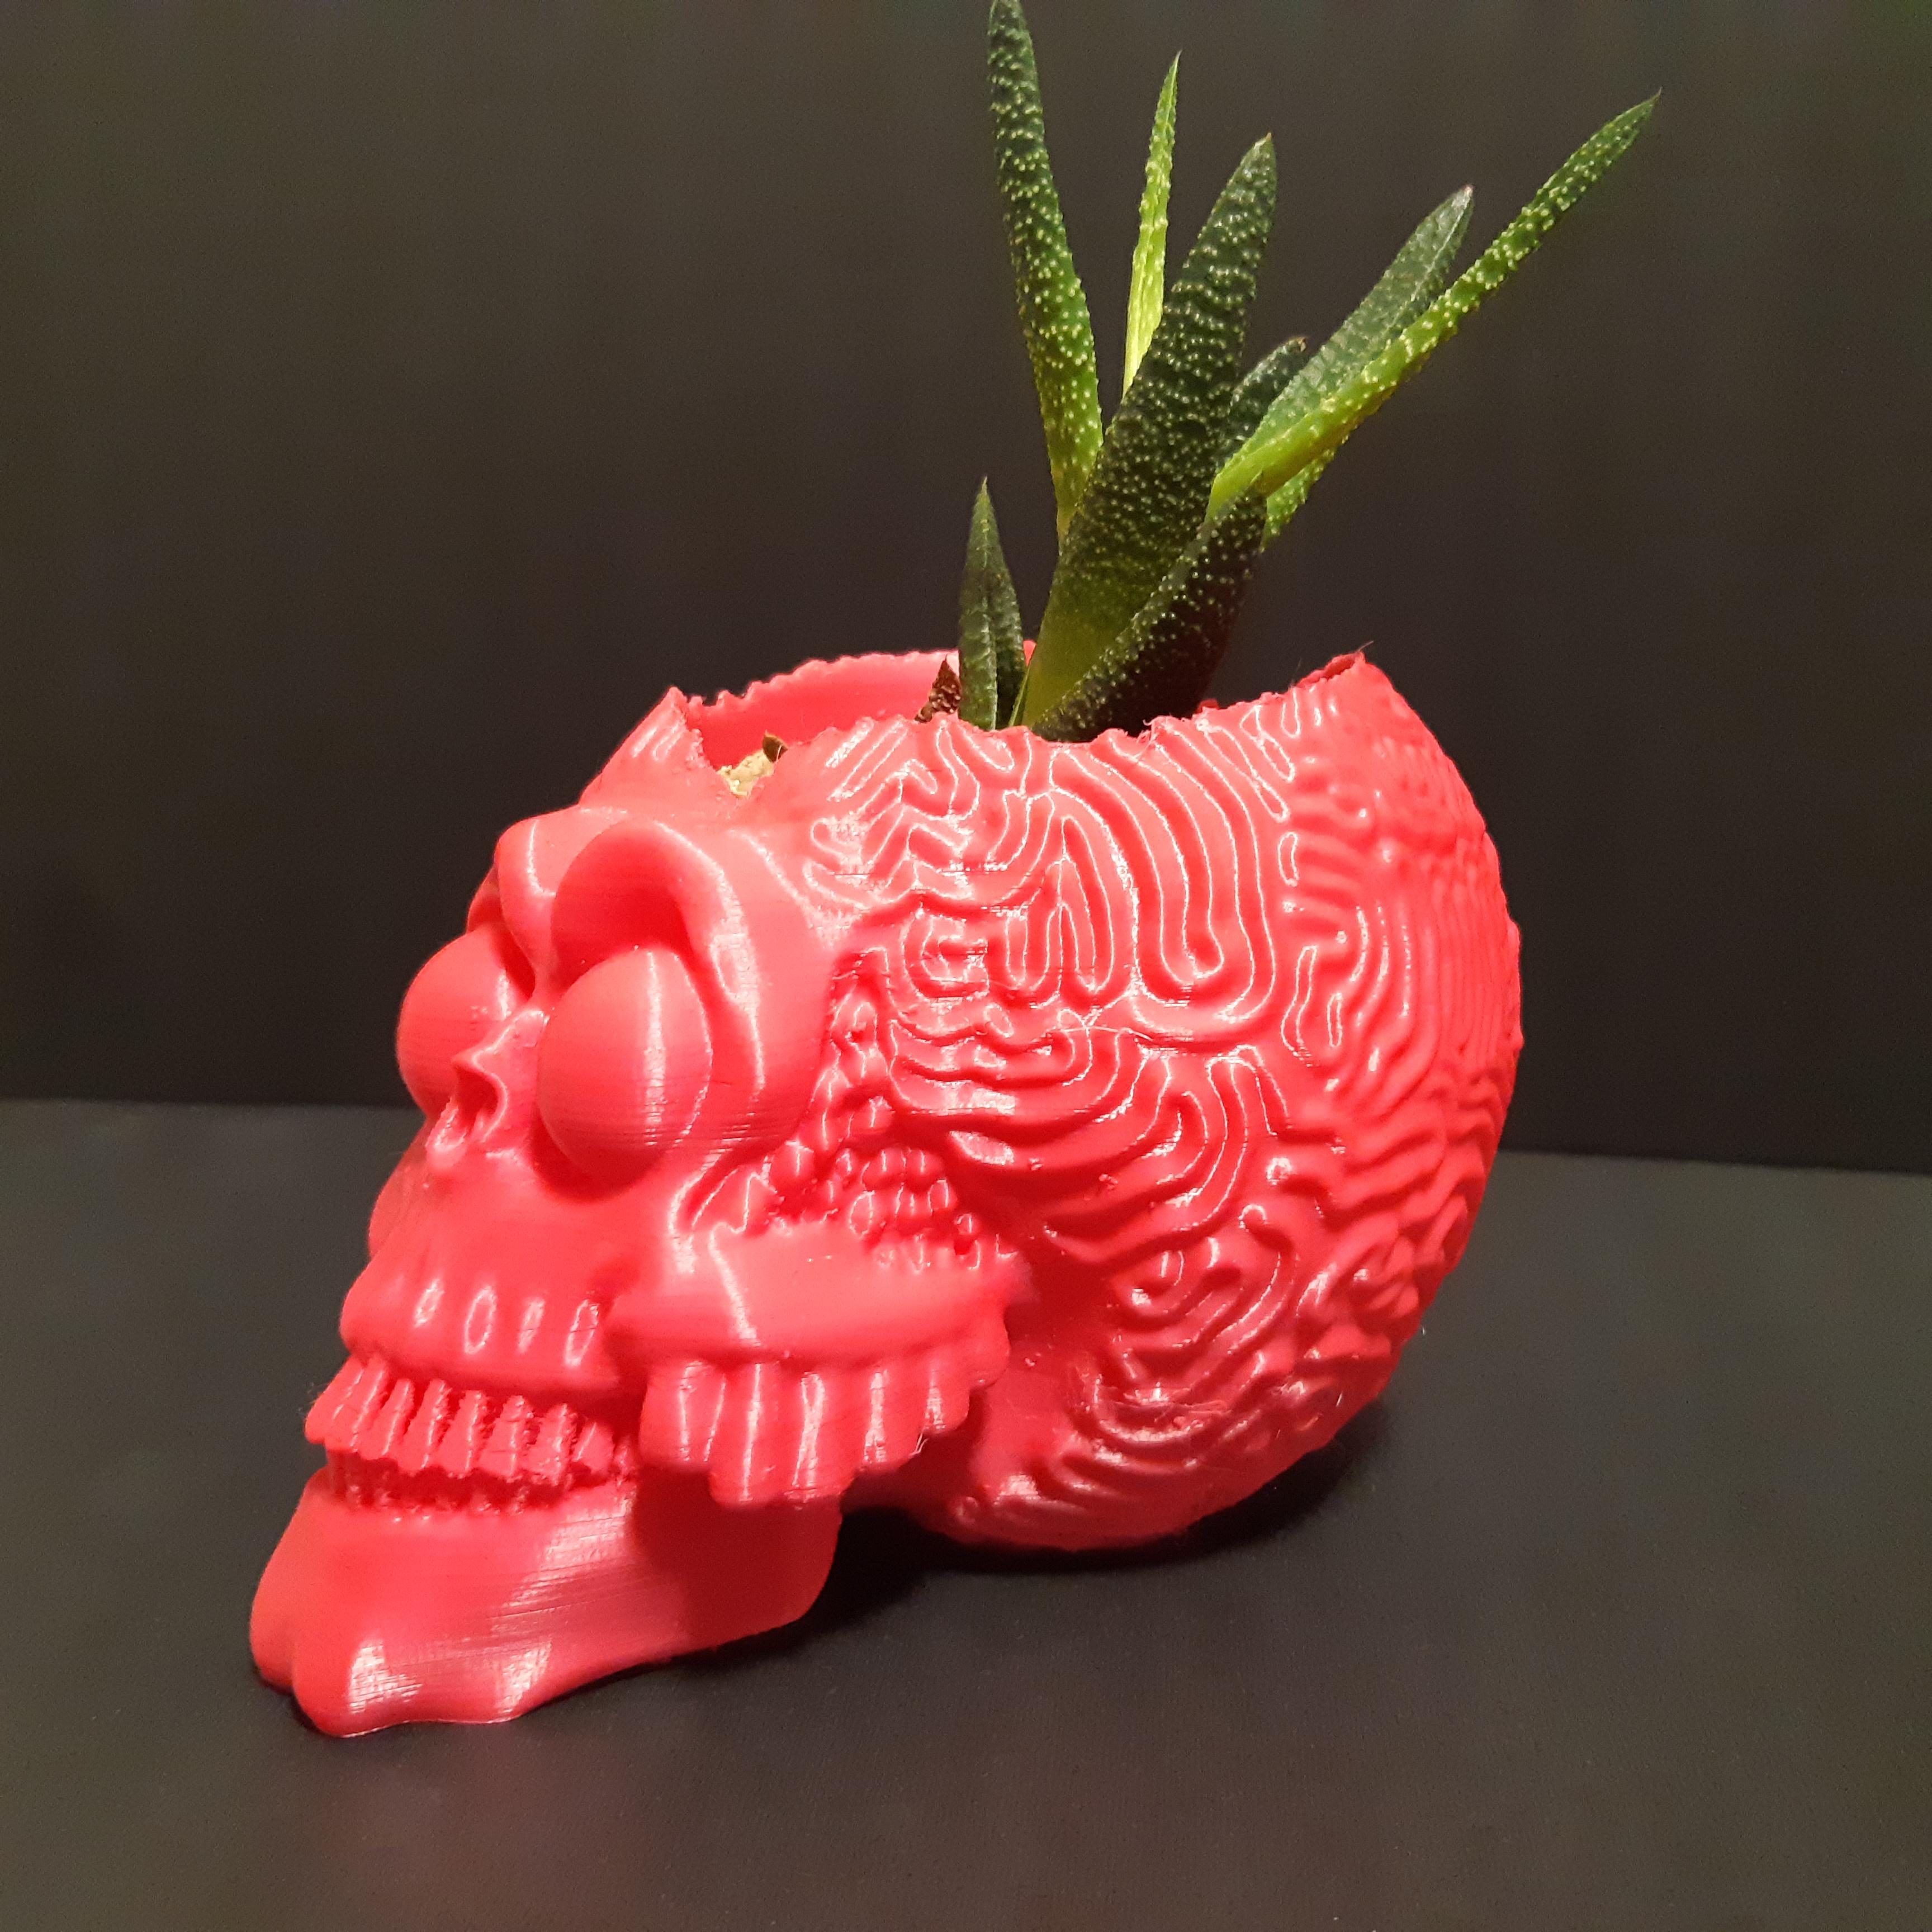 MARTIAN SKULL PLANTER - WITH OR WITHOUT DRAINAGE 3d model